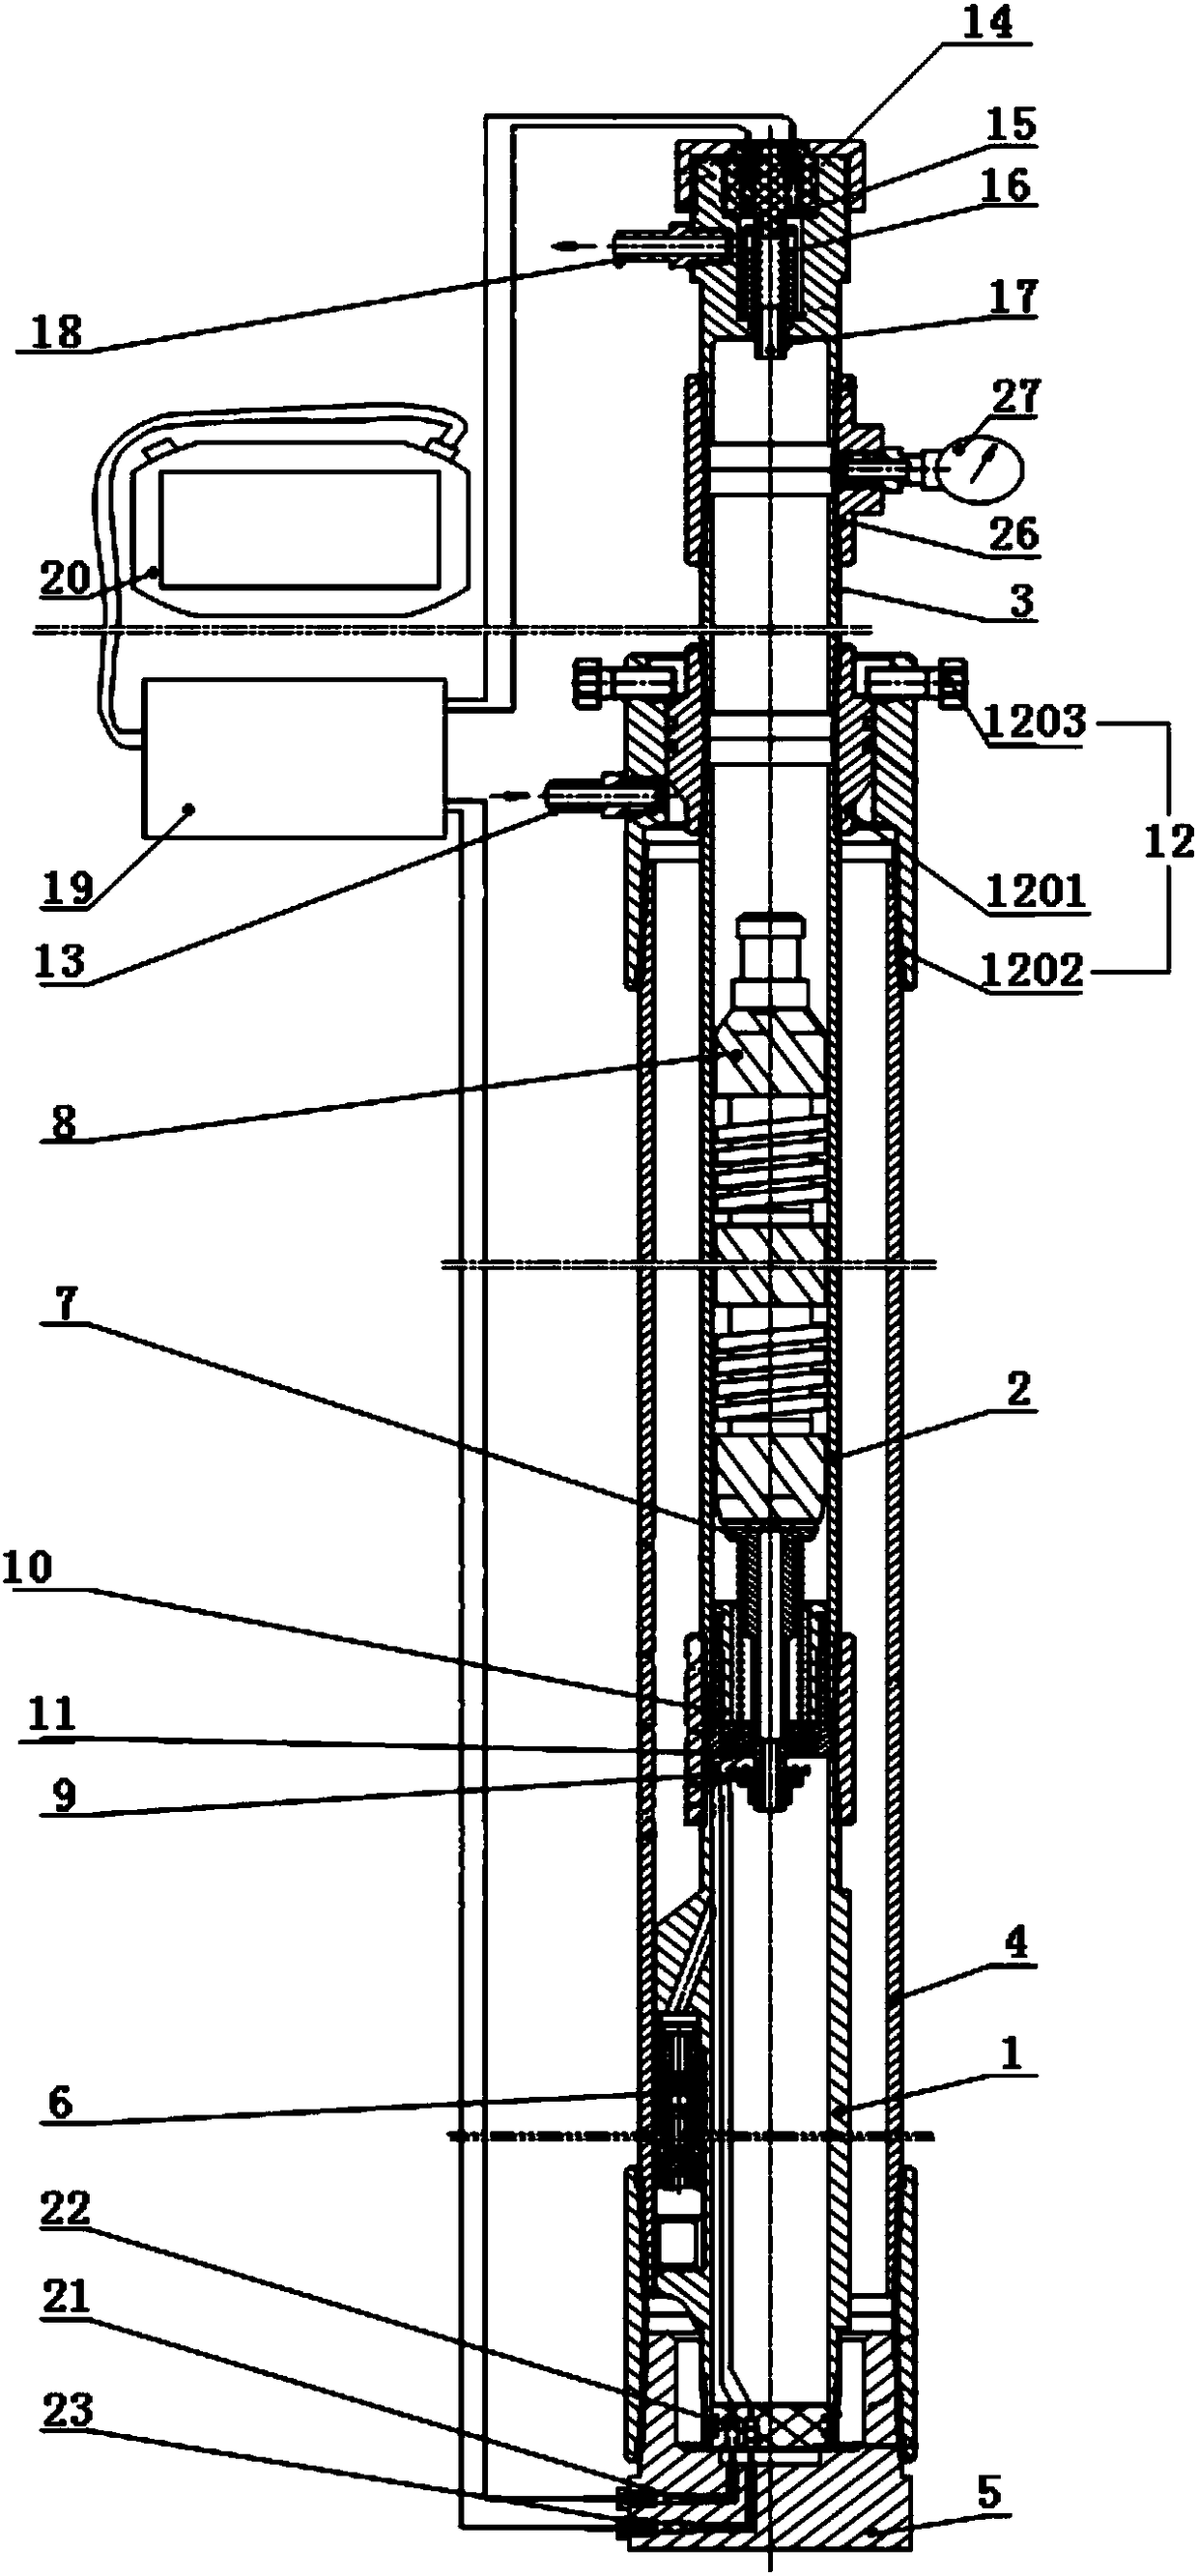 Gas-lift production plunger service time testing device and method